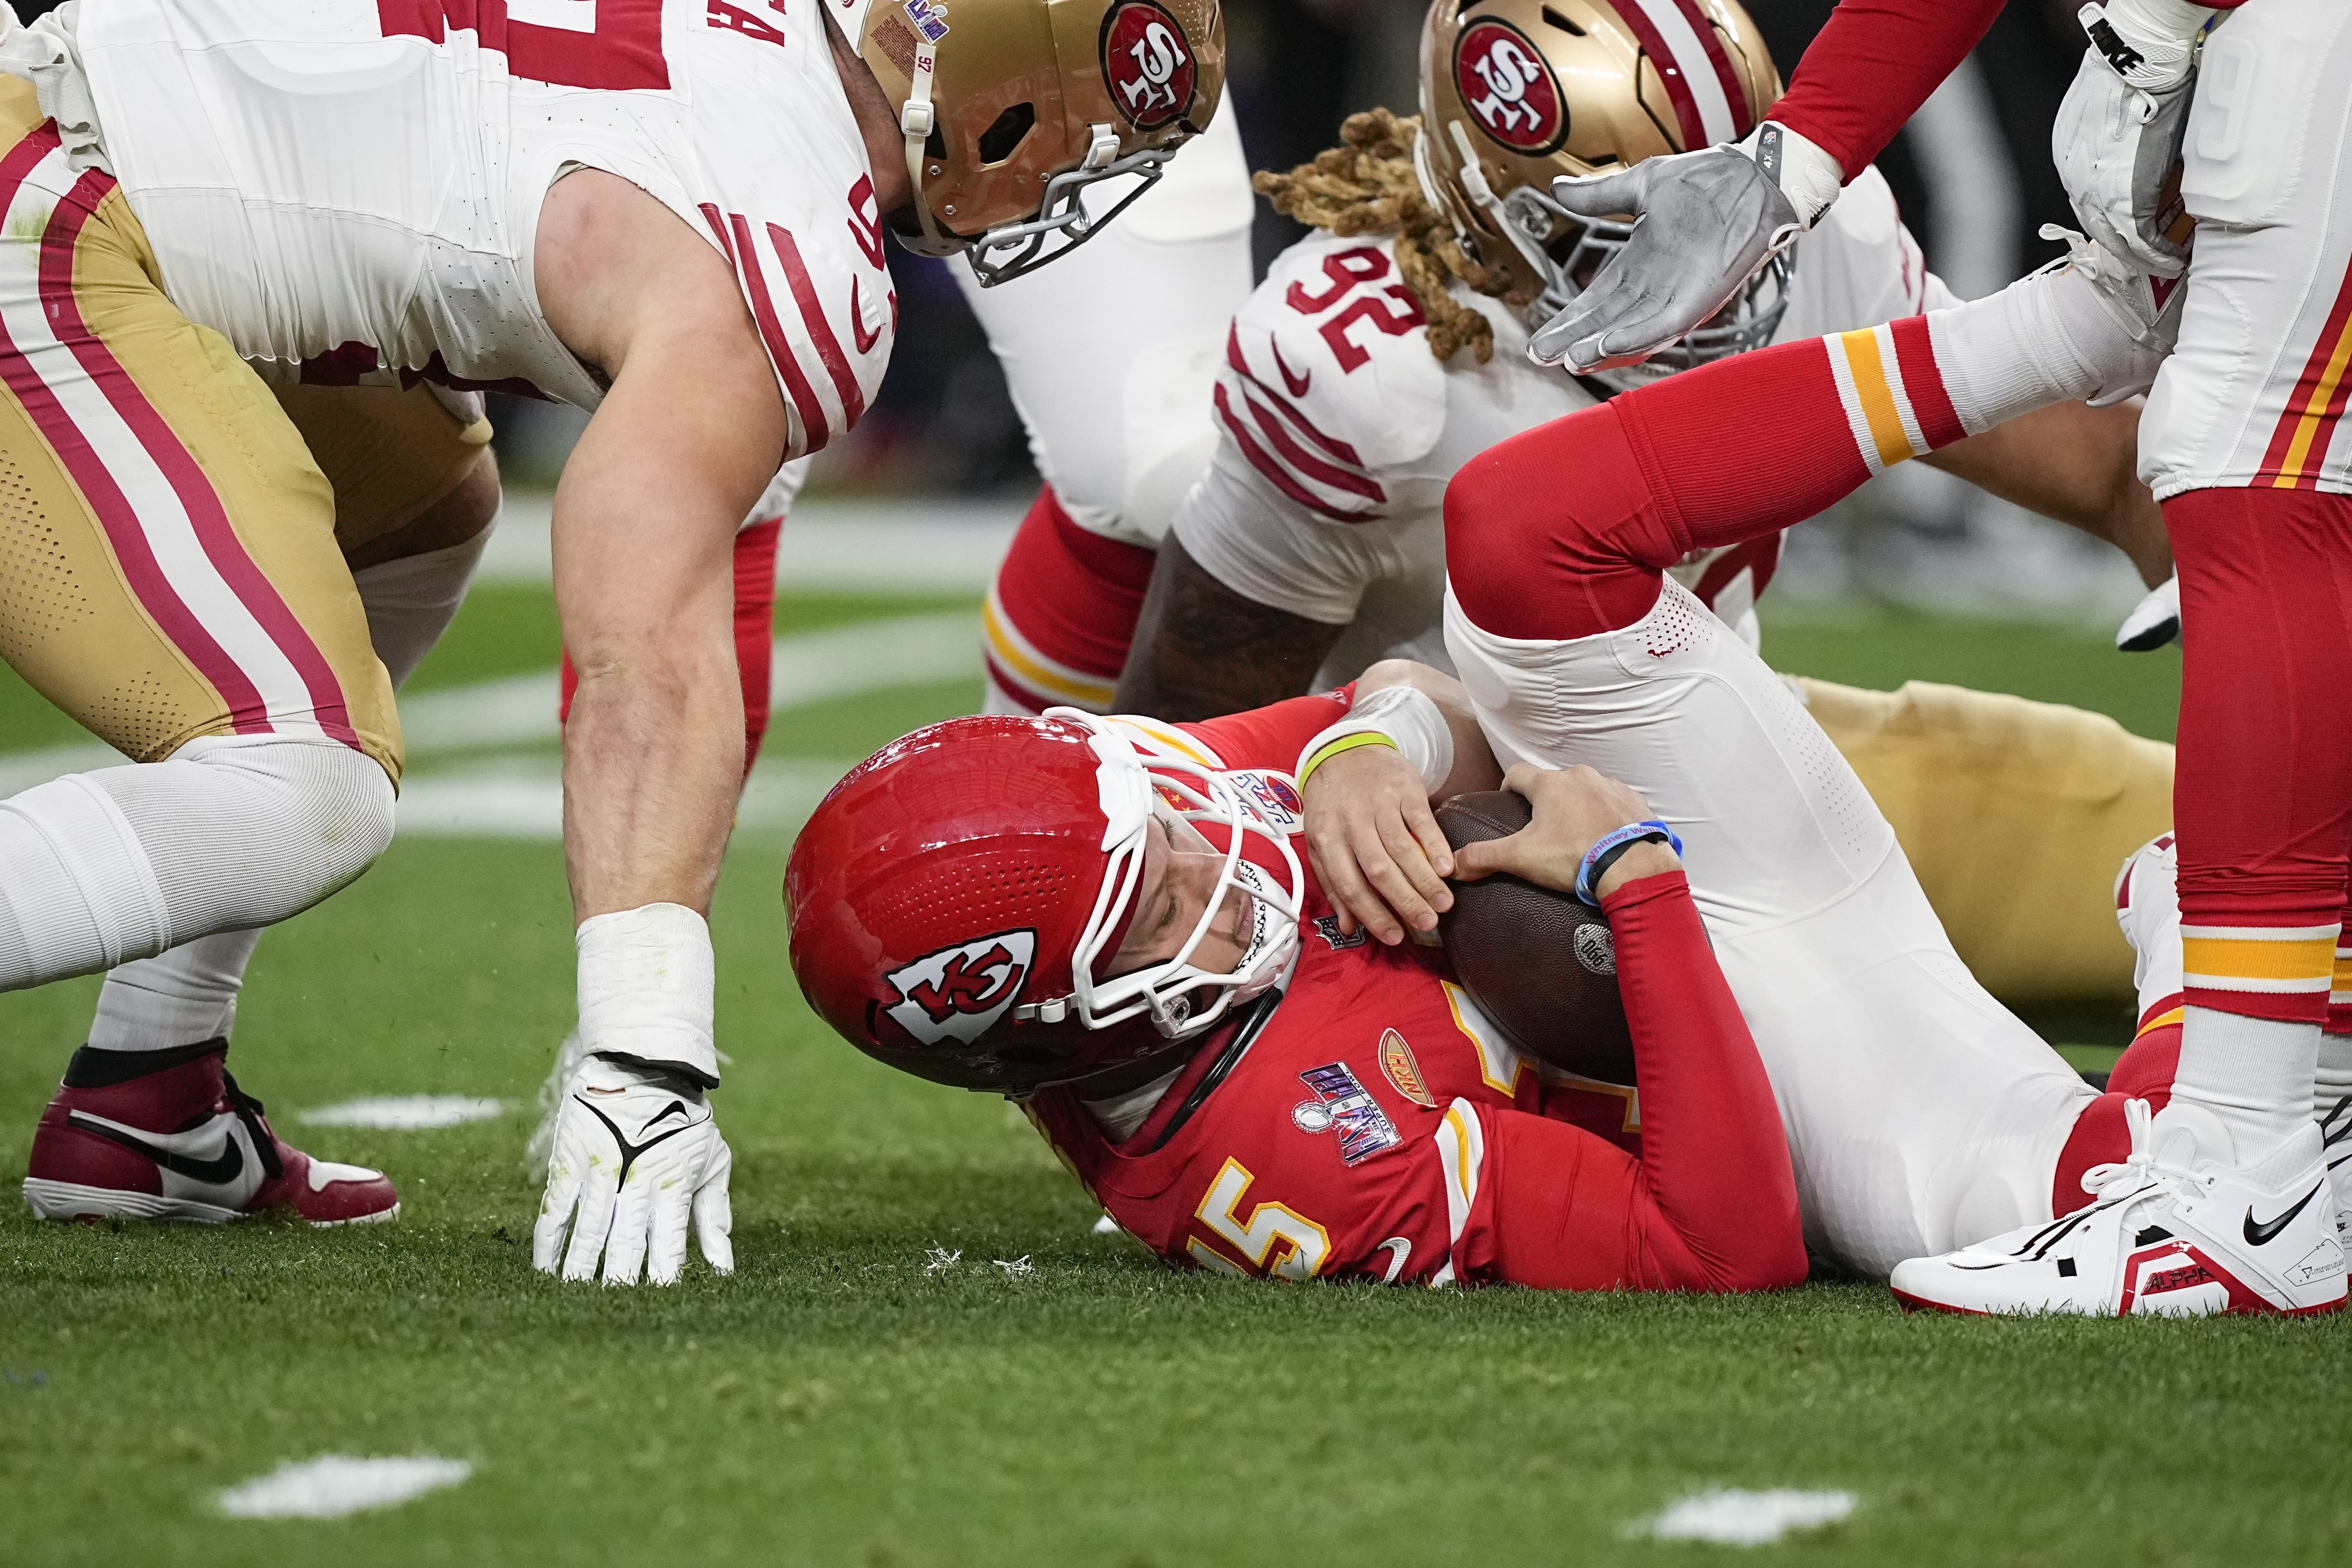 Kansas City Chiefs dominate all of St. Louis television, not just